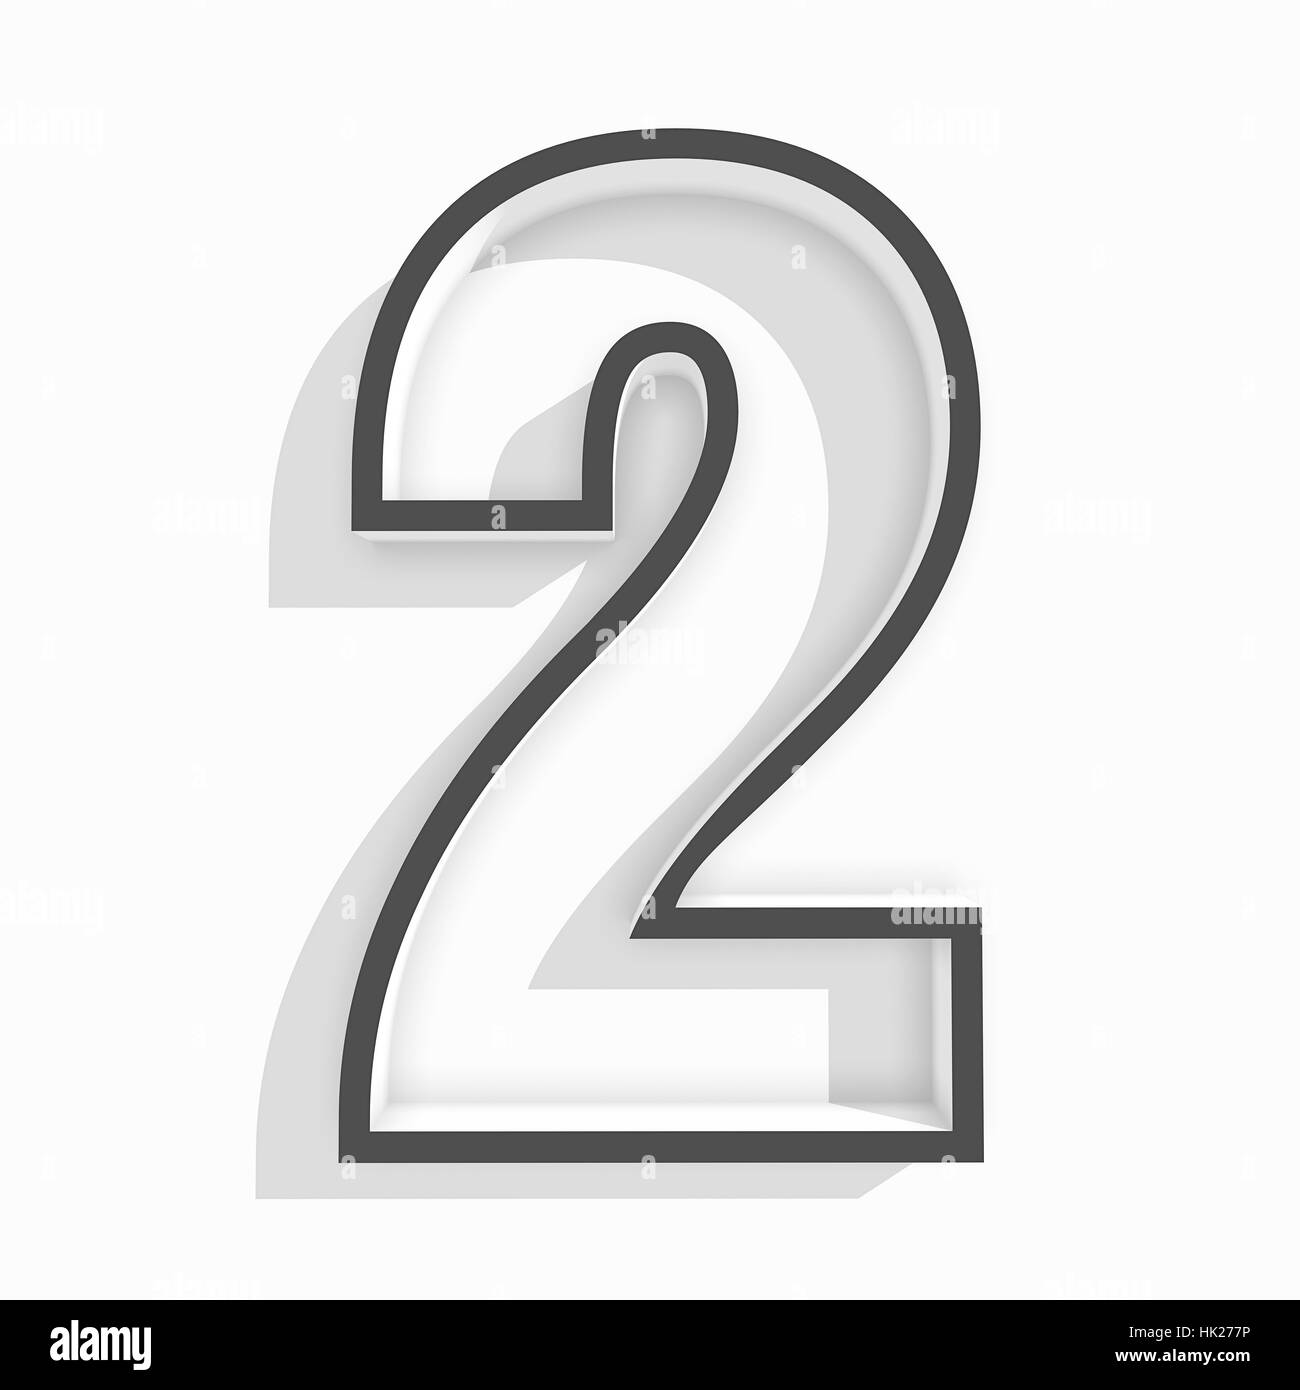 Green Number 2 Isolated On White Stock Illustration 2245527977